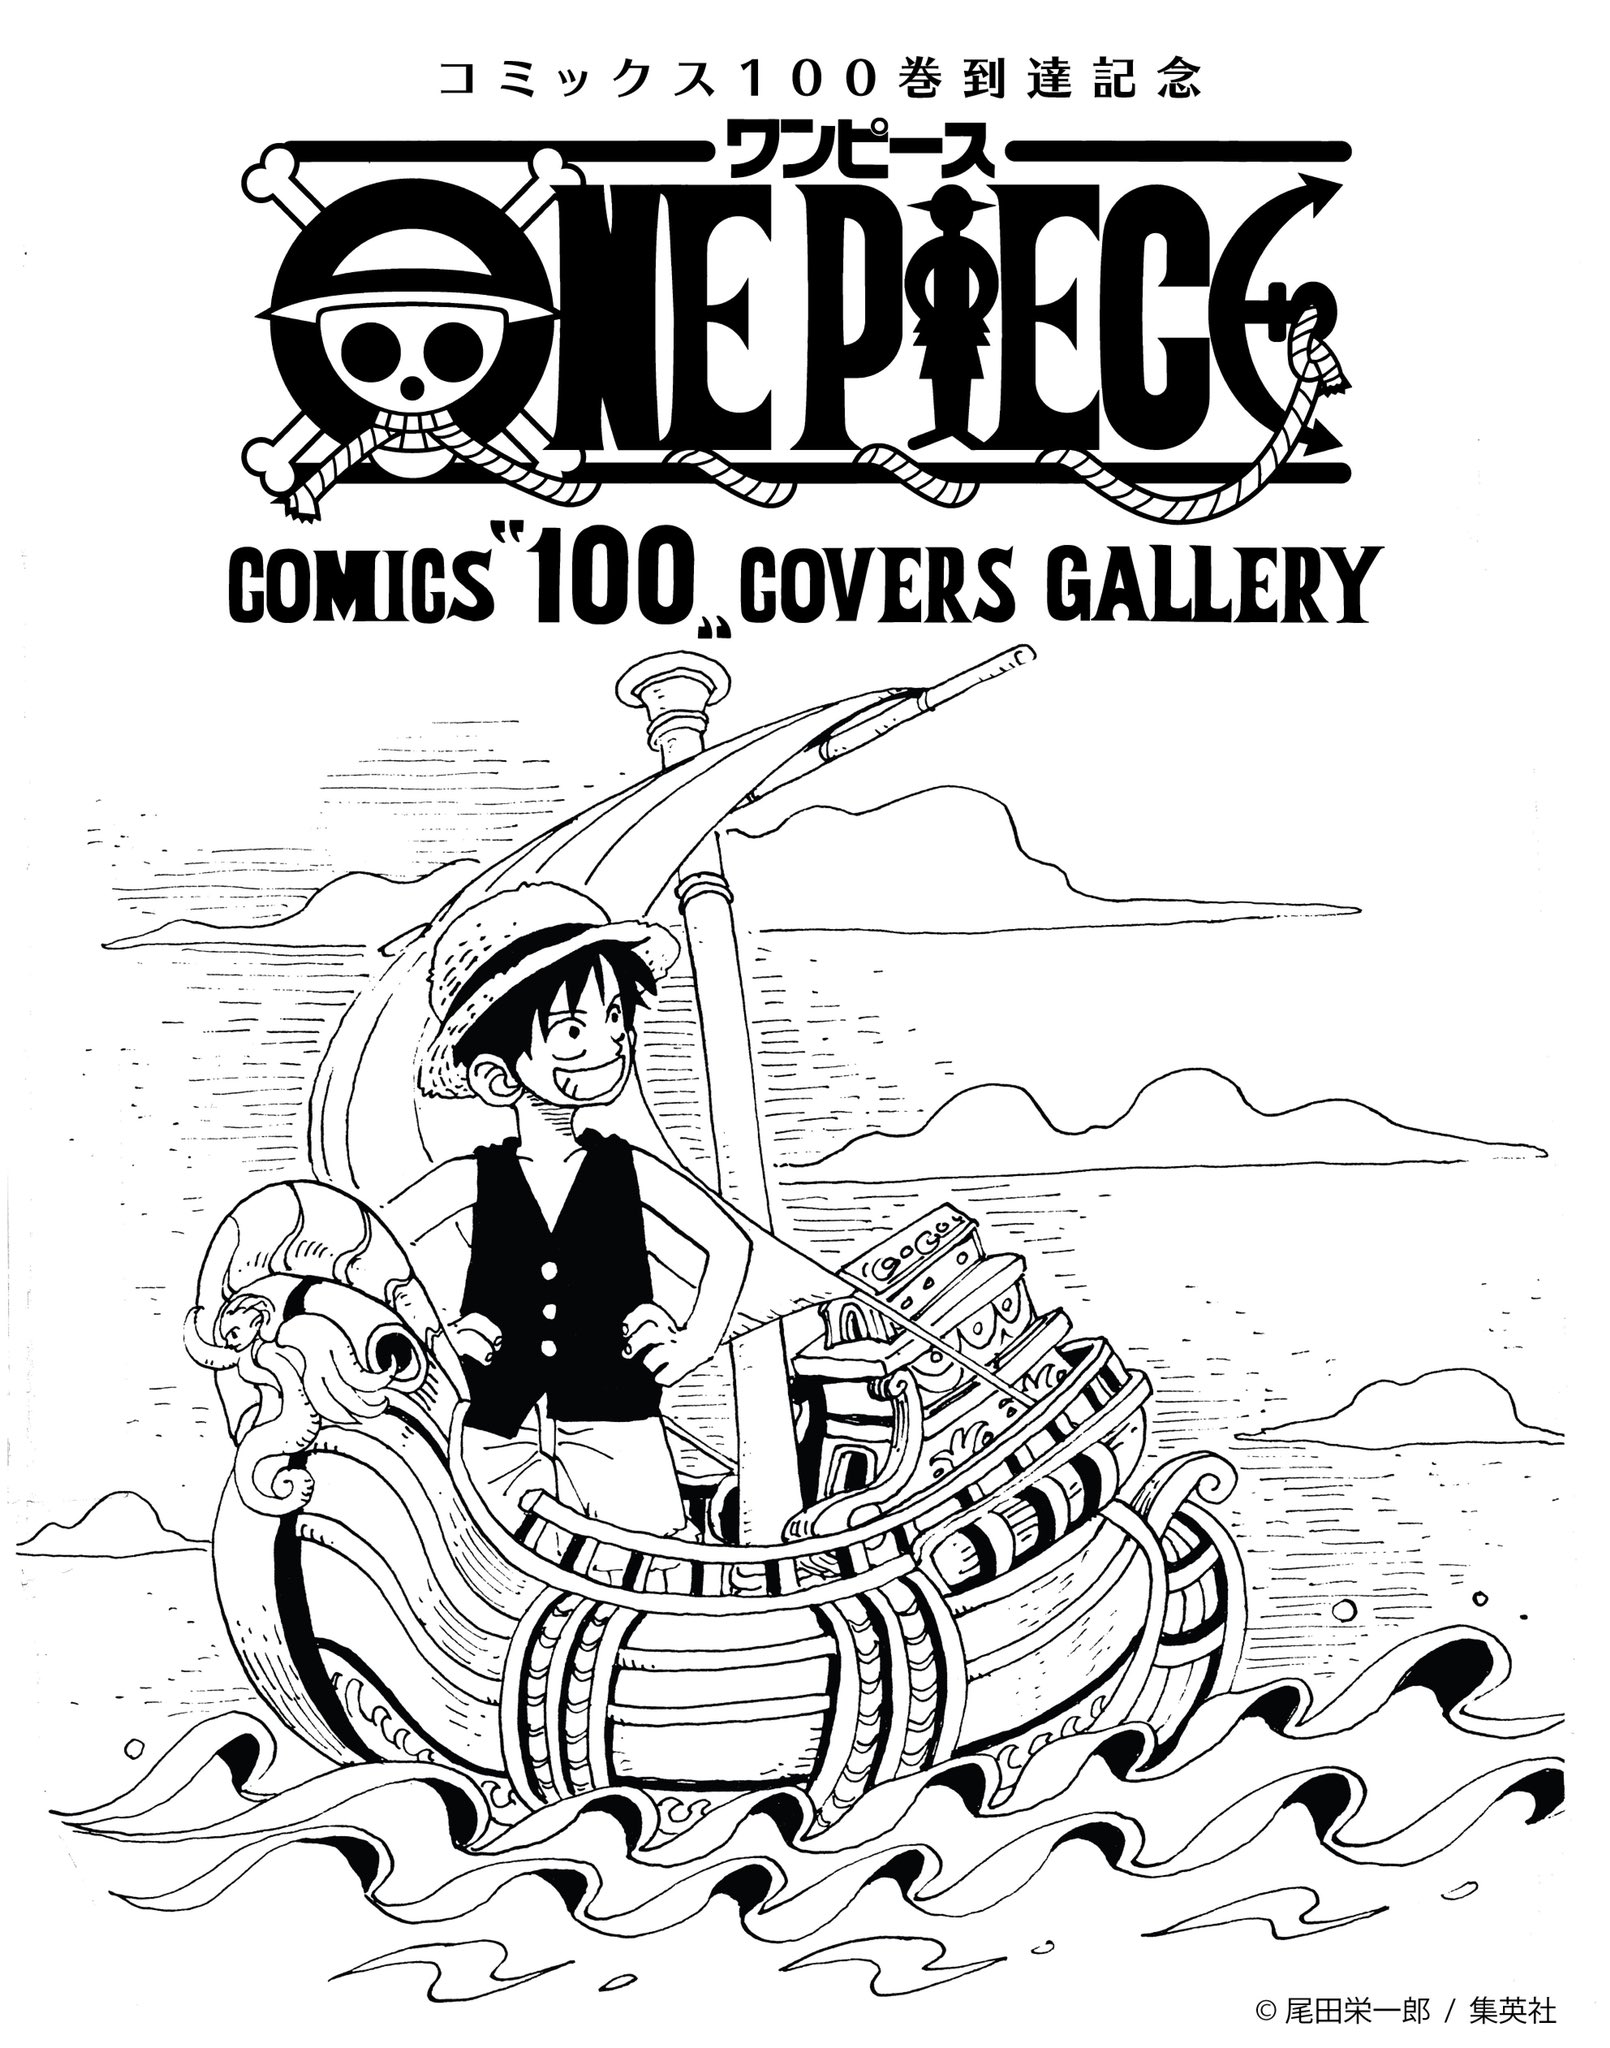 Tweets With Replies By One Piece Comics 100 Covers Gallery Op 100comics Twitter